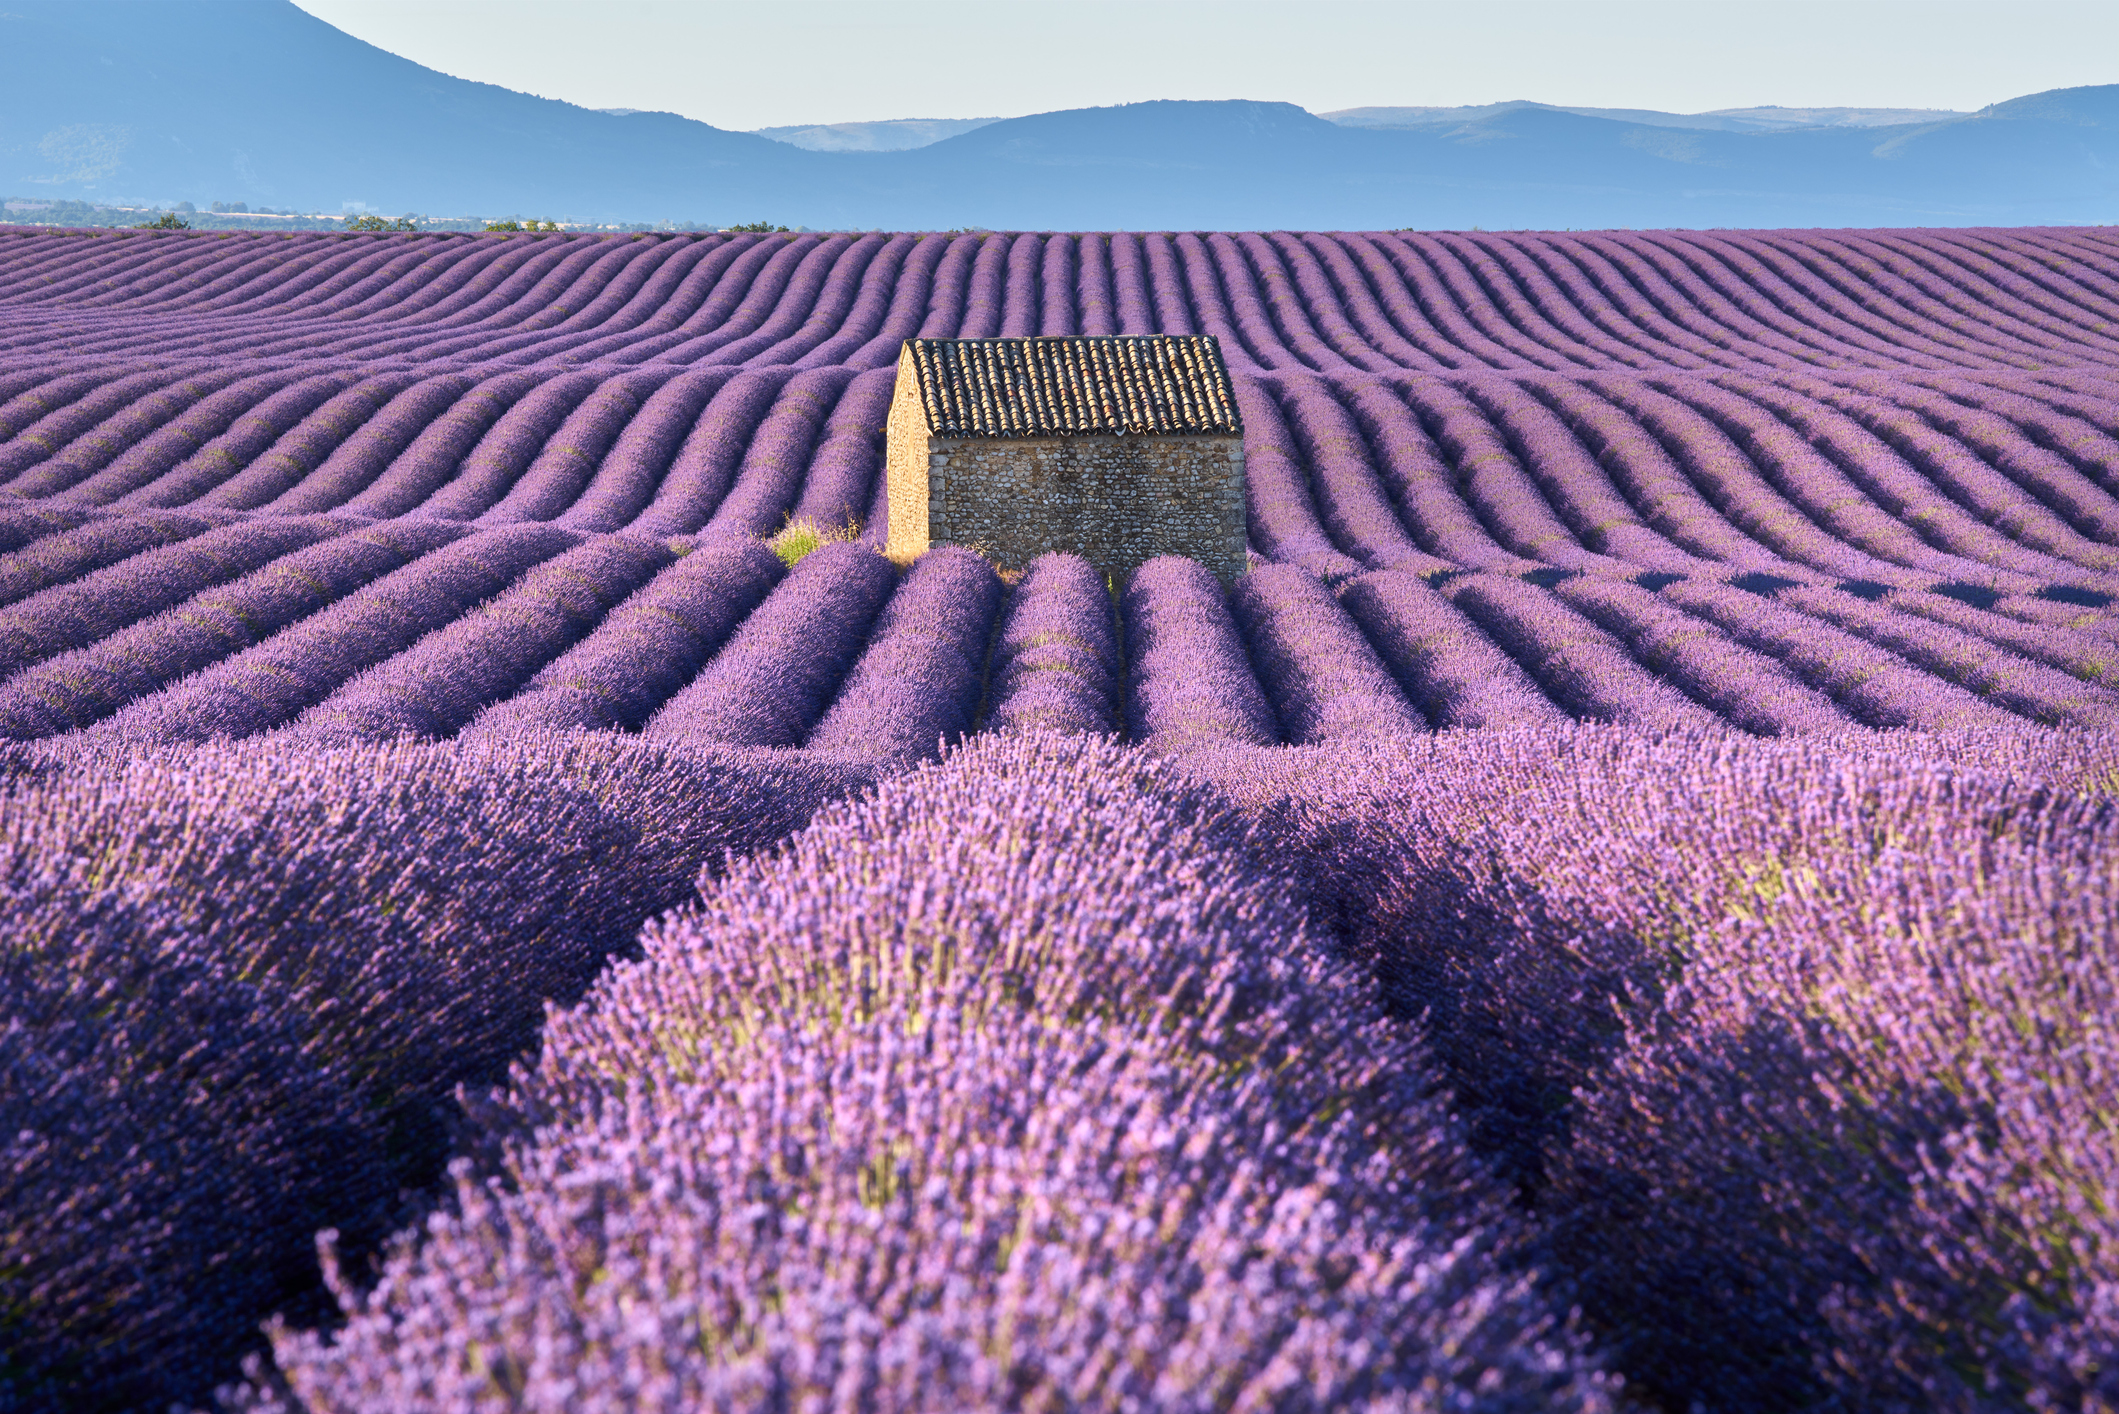 Summer in Provence